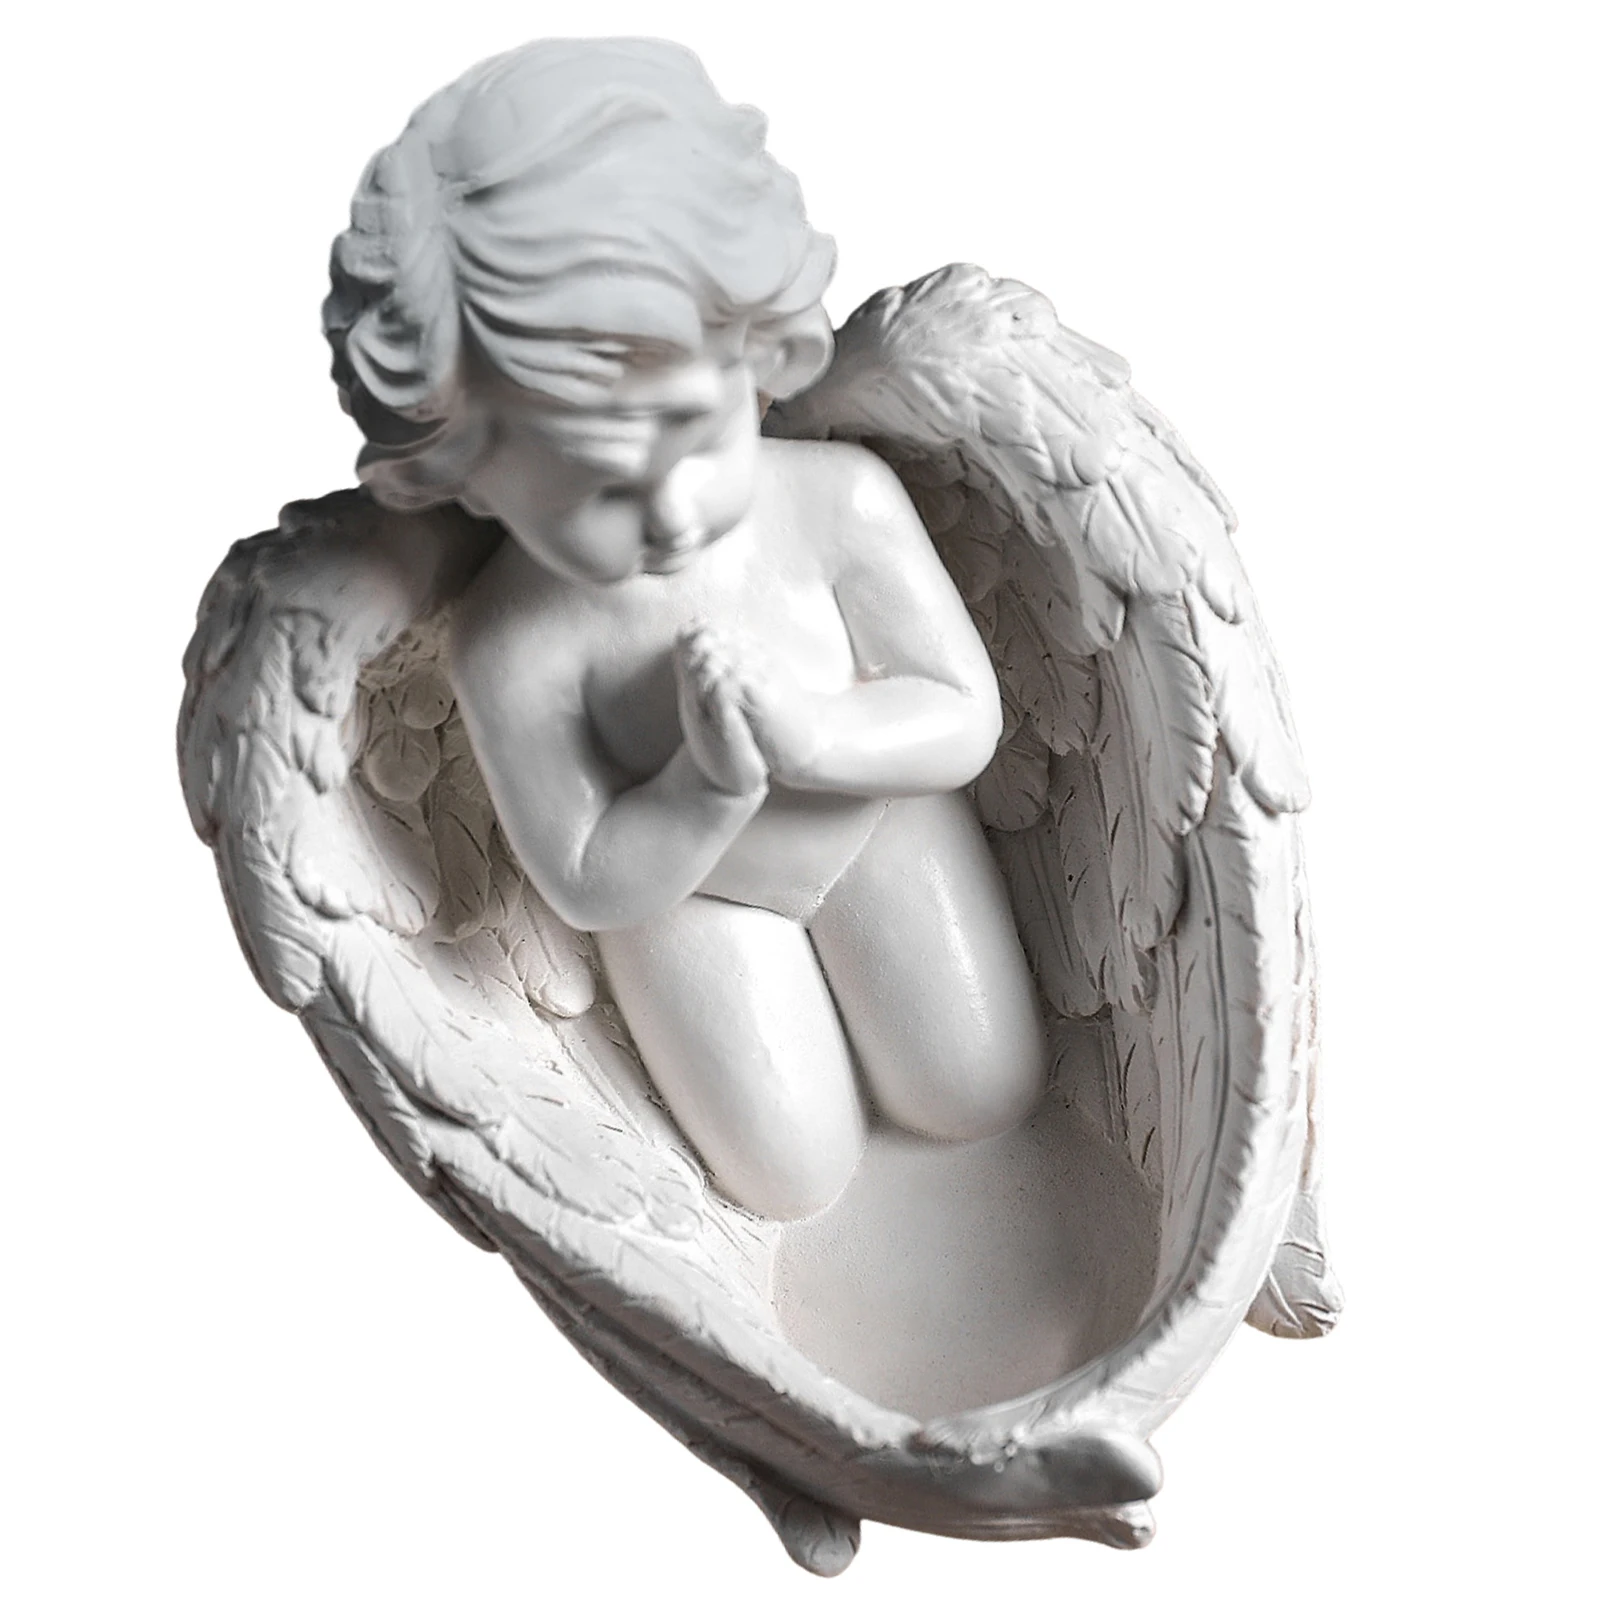 

Angel Candle Holder Resin Angel Collection Figurine Candle Stand Home Garden Guardian Decorative Angel Sculpture Memorial Statue